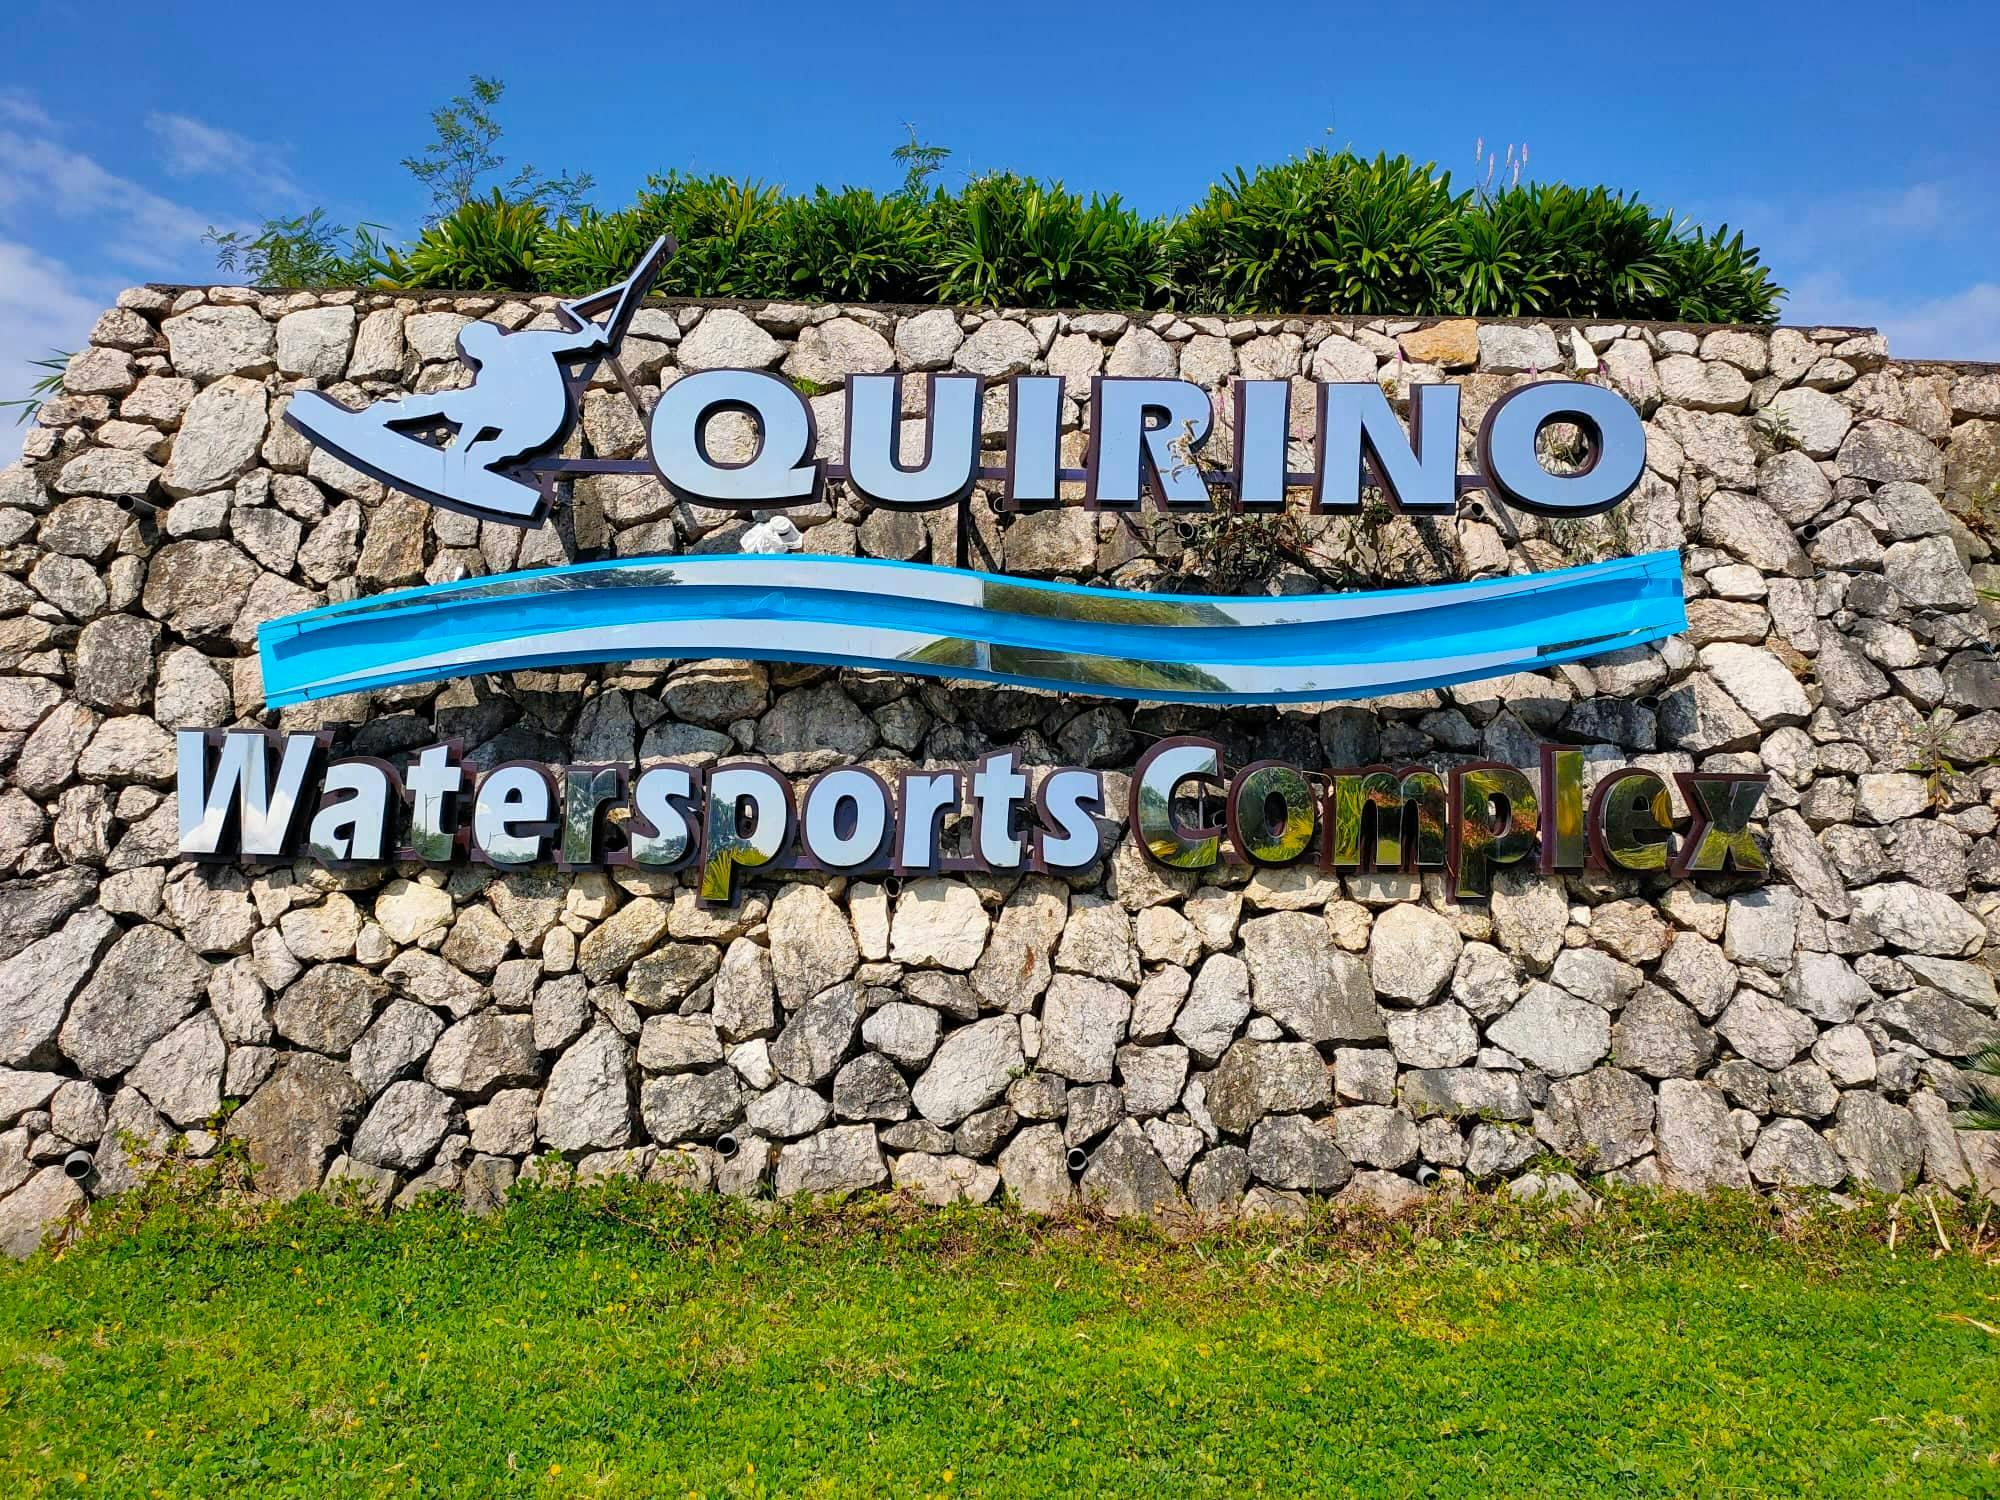 Book this Quirino tour and try Wakeboarding with your family